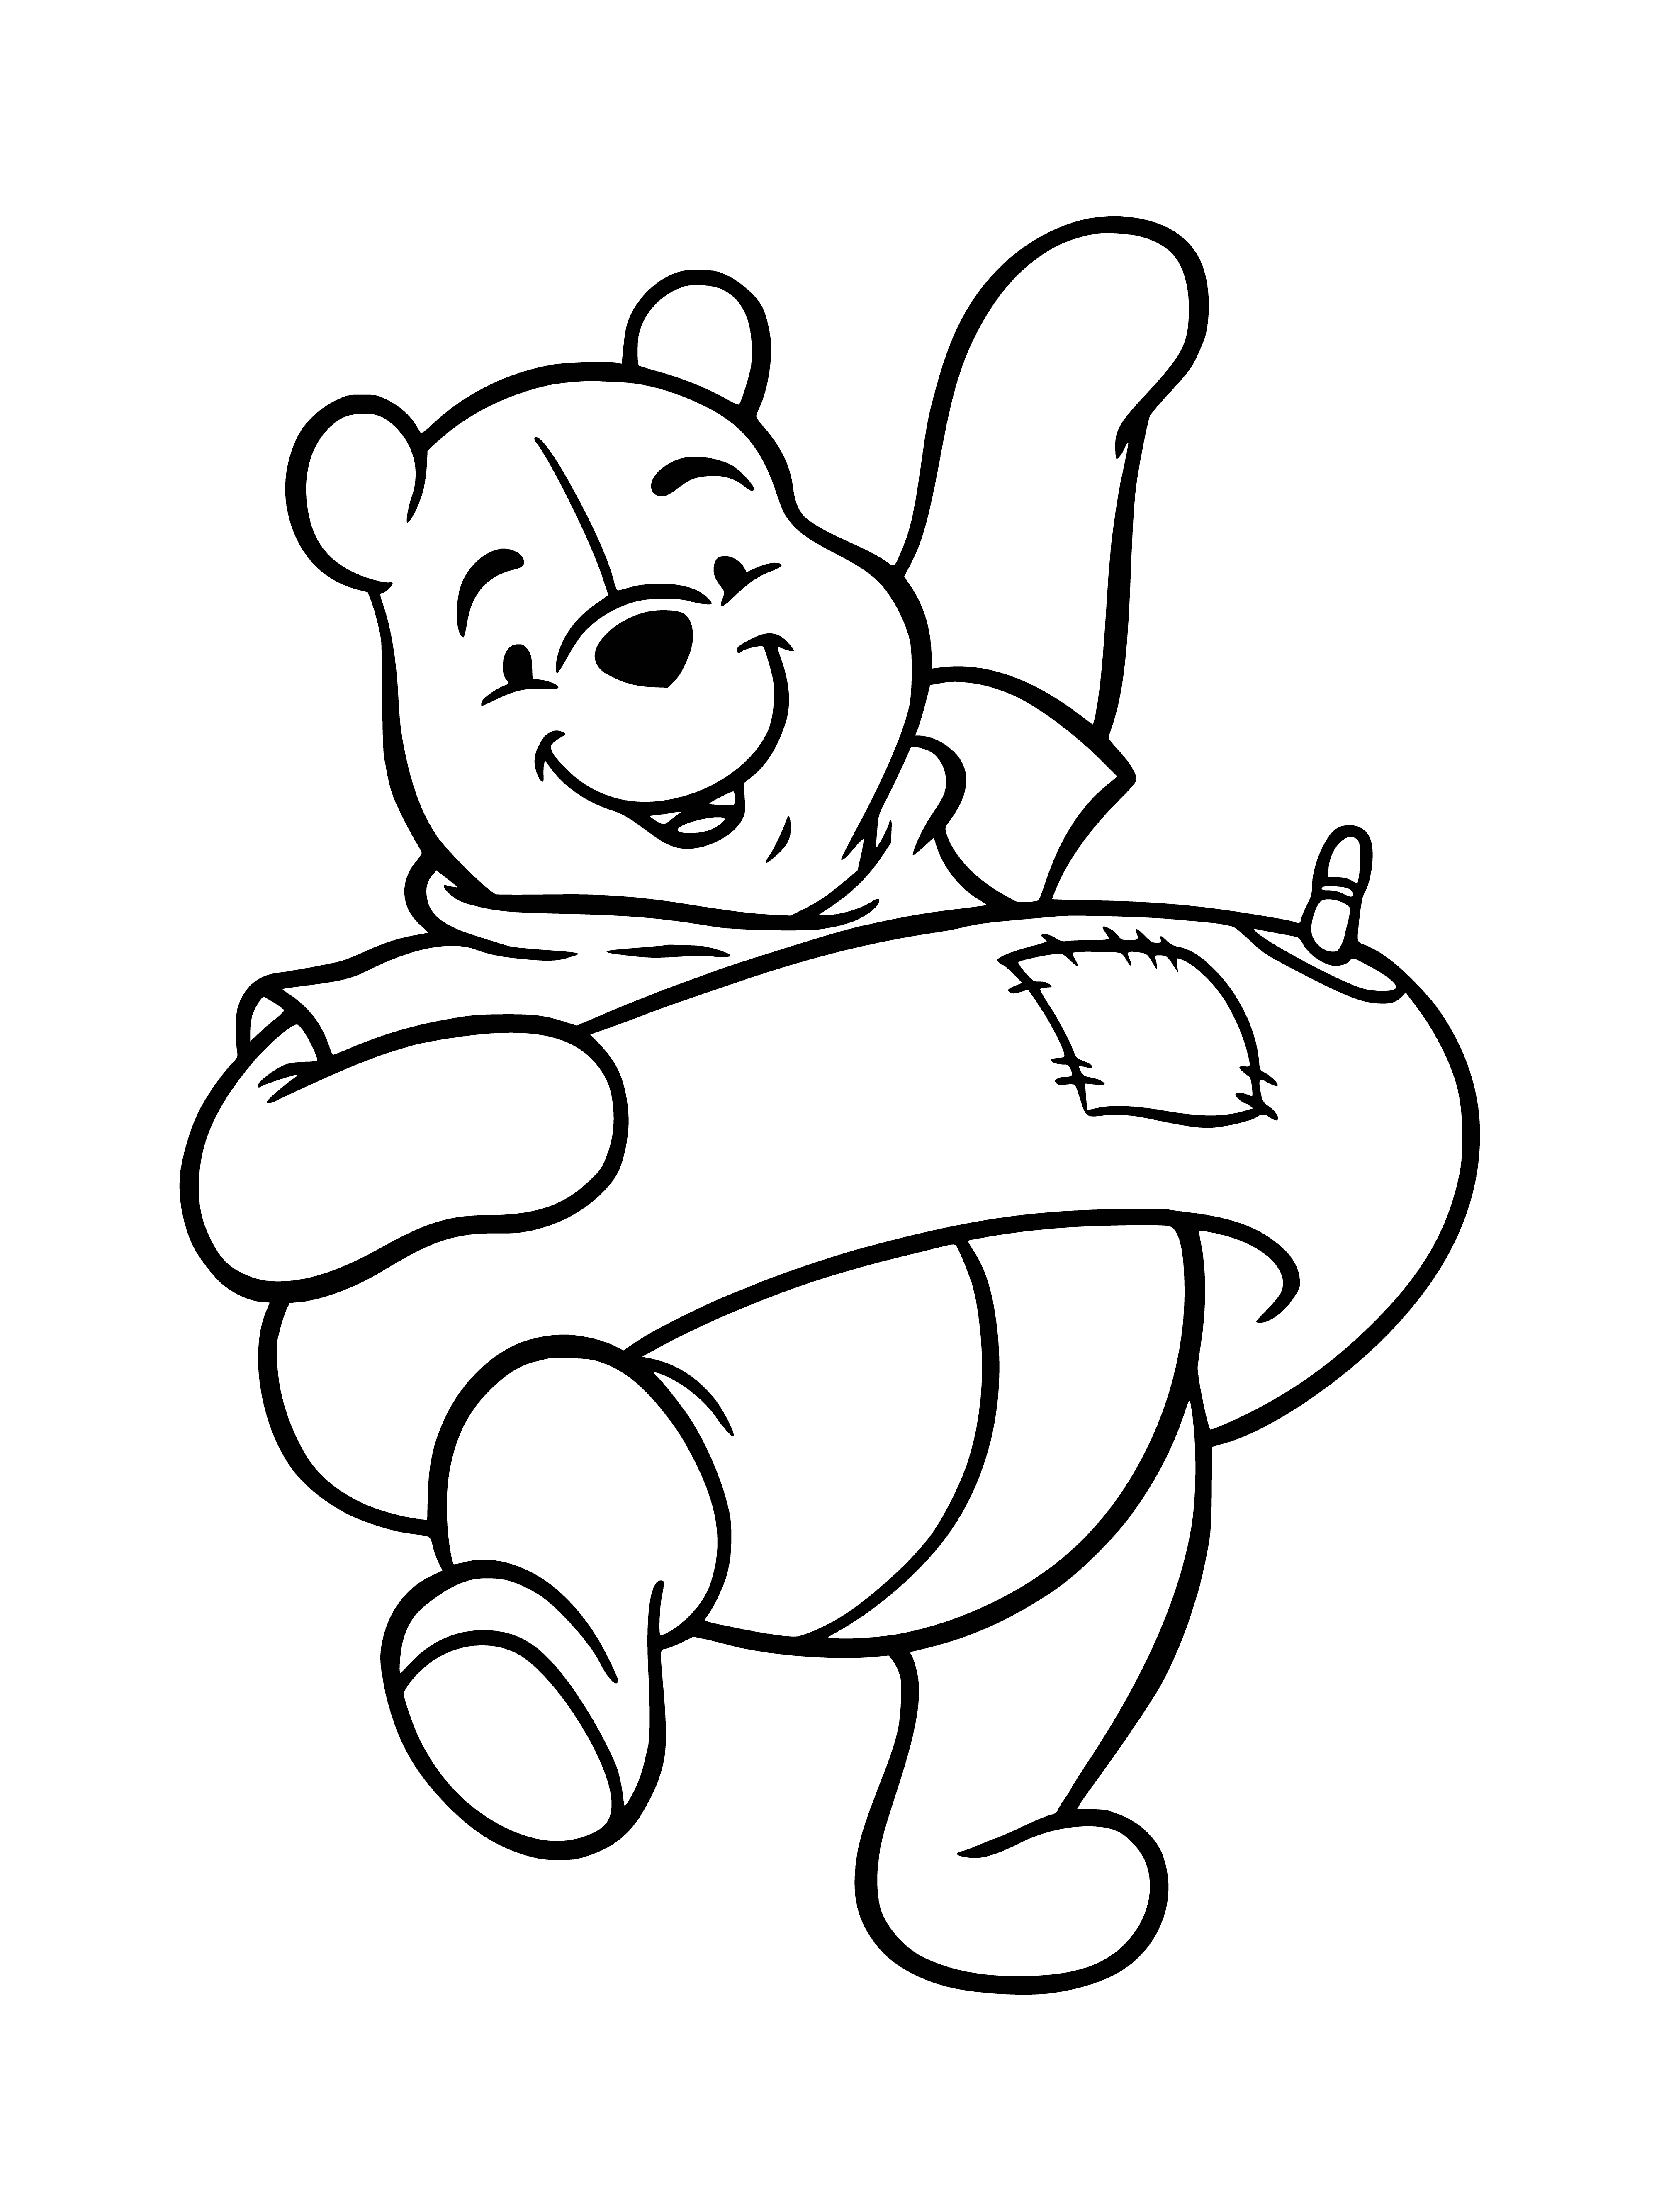 Winnie the bear goes for a swim coloring page